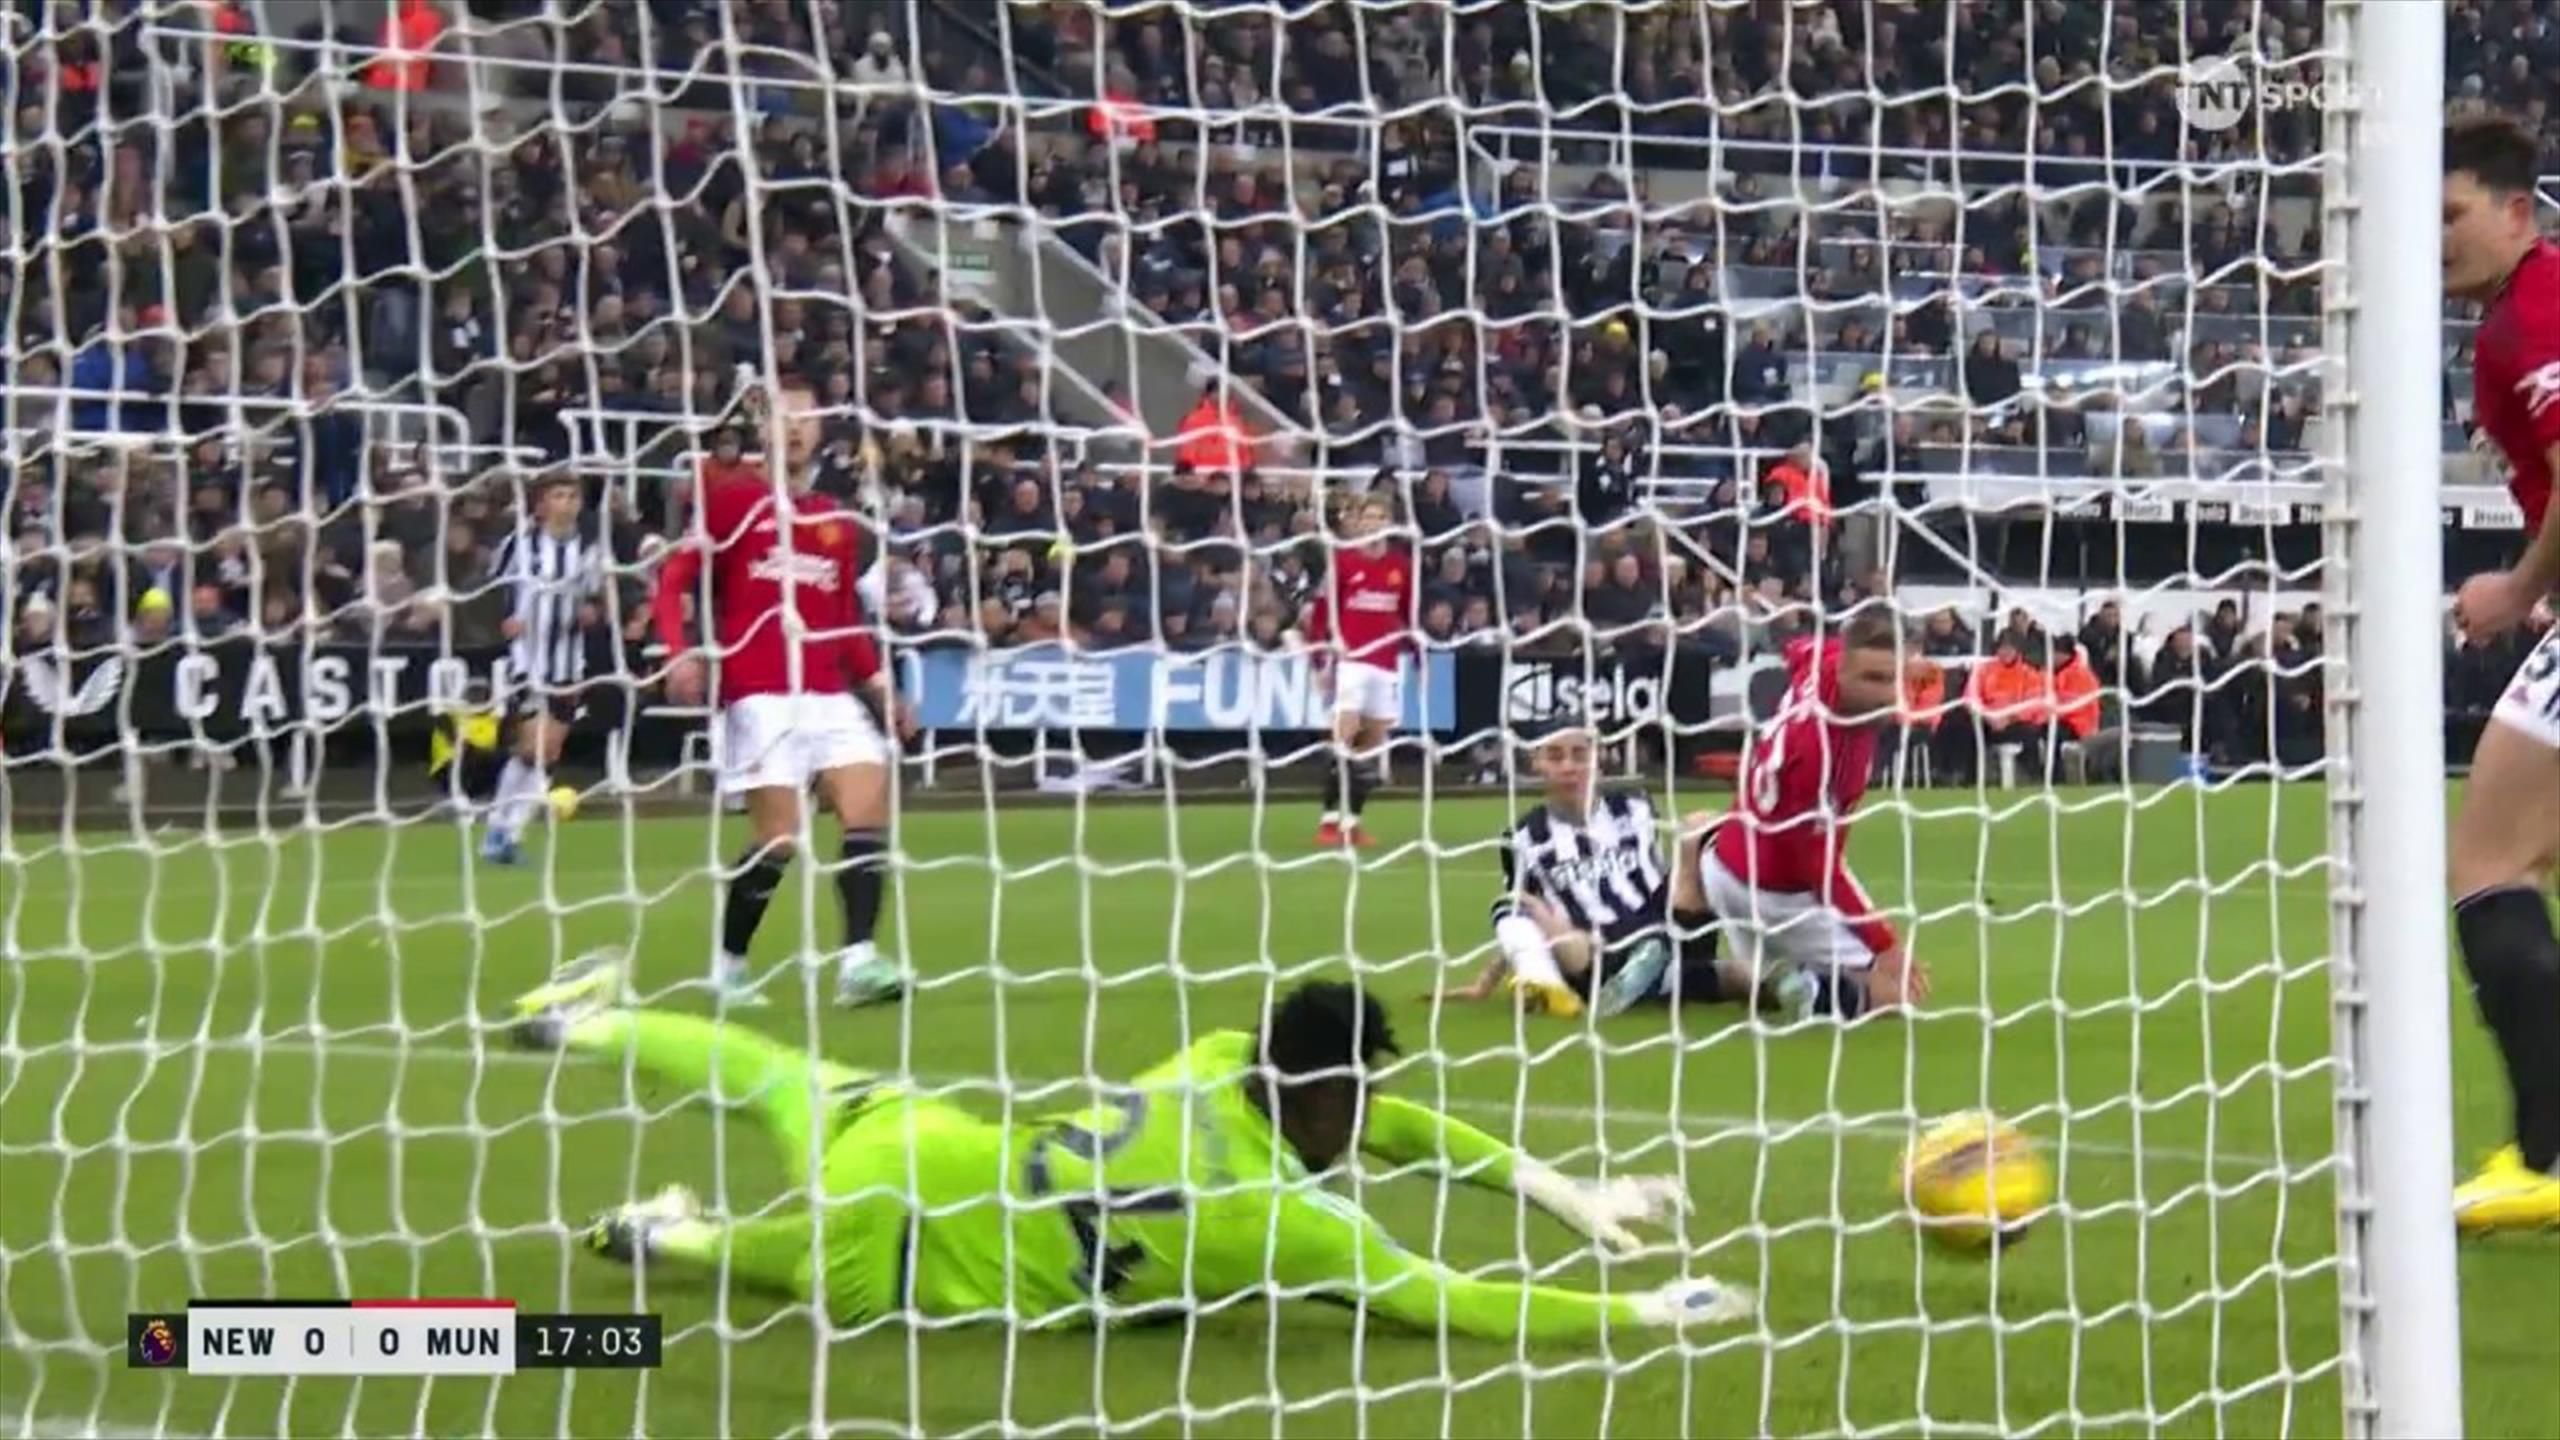 'Really good save' - Manchester United goalkeeper Andre Onana gets 'big hand' to deny Newcastle's Miguel Almiron